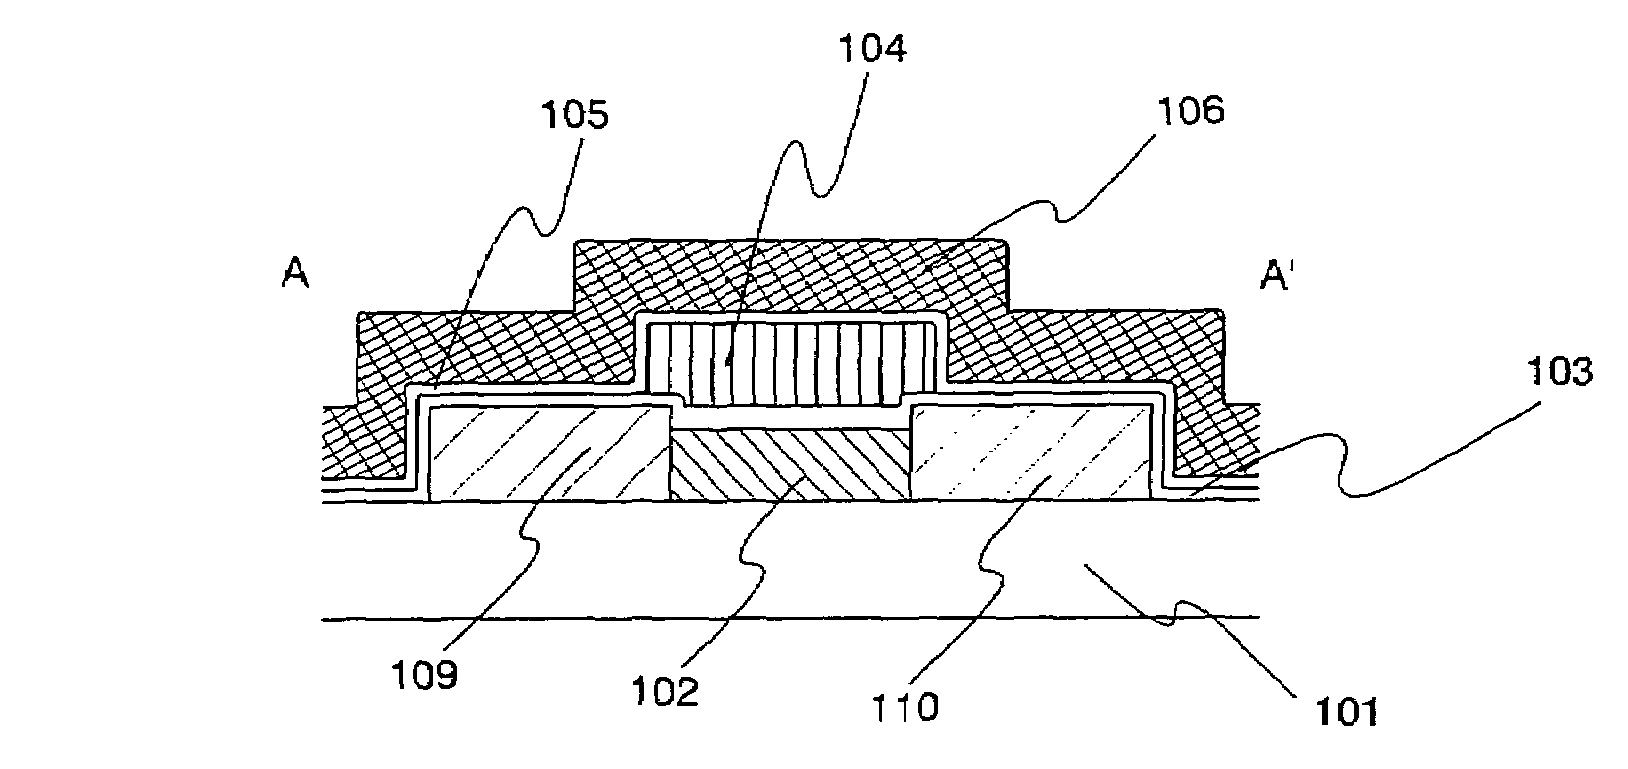 Semiconductor memory cell and semiconductor memory device